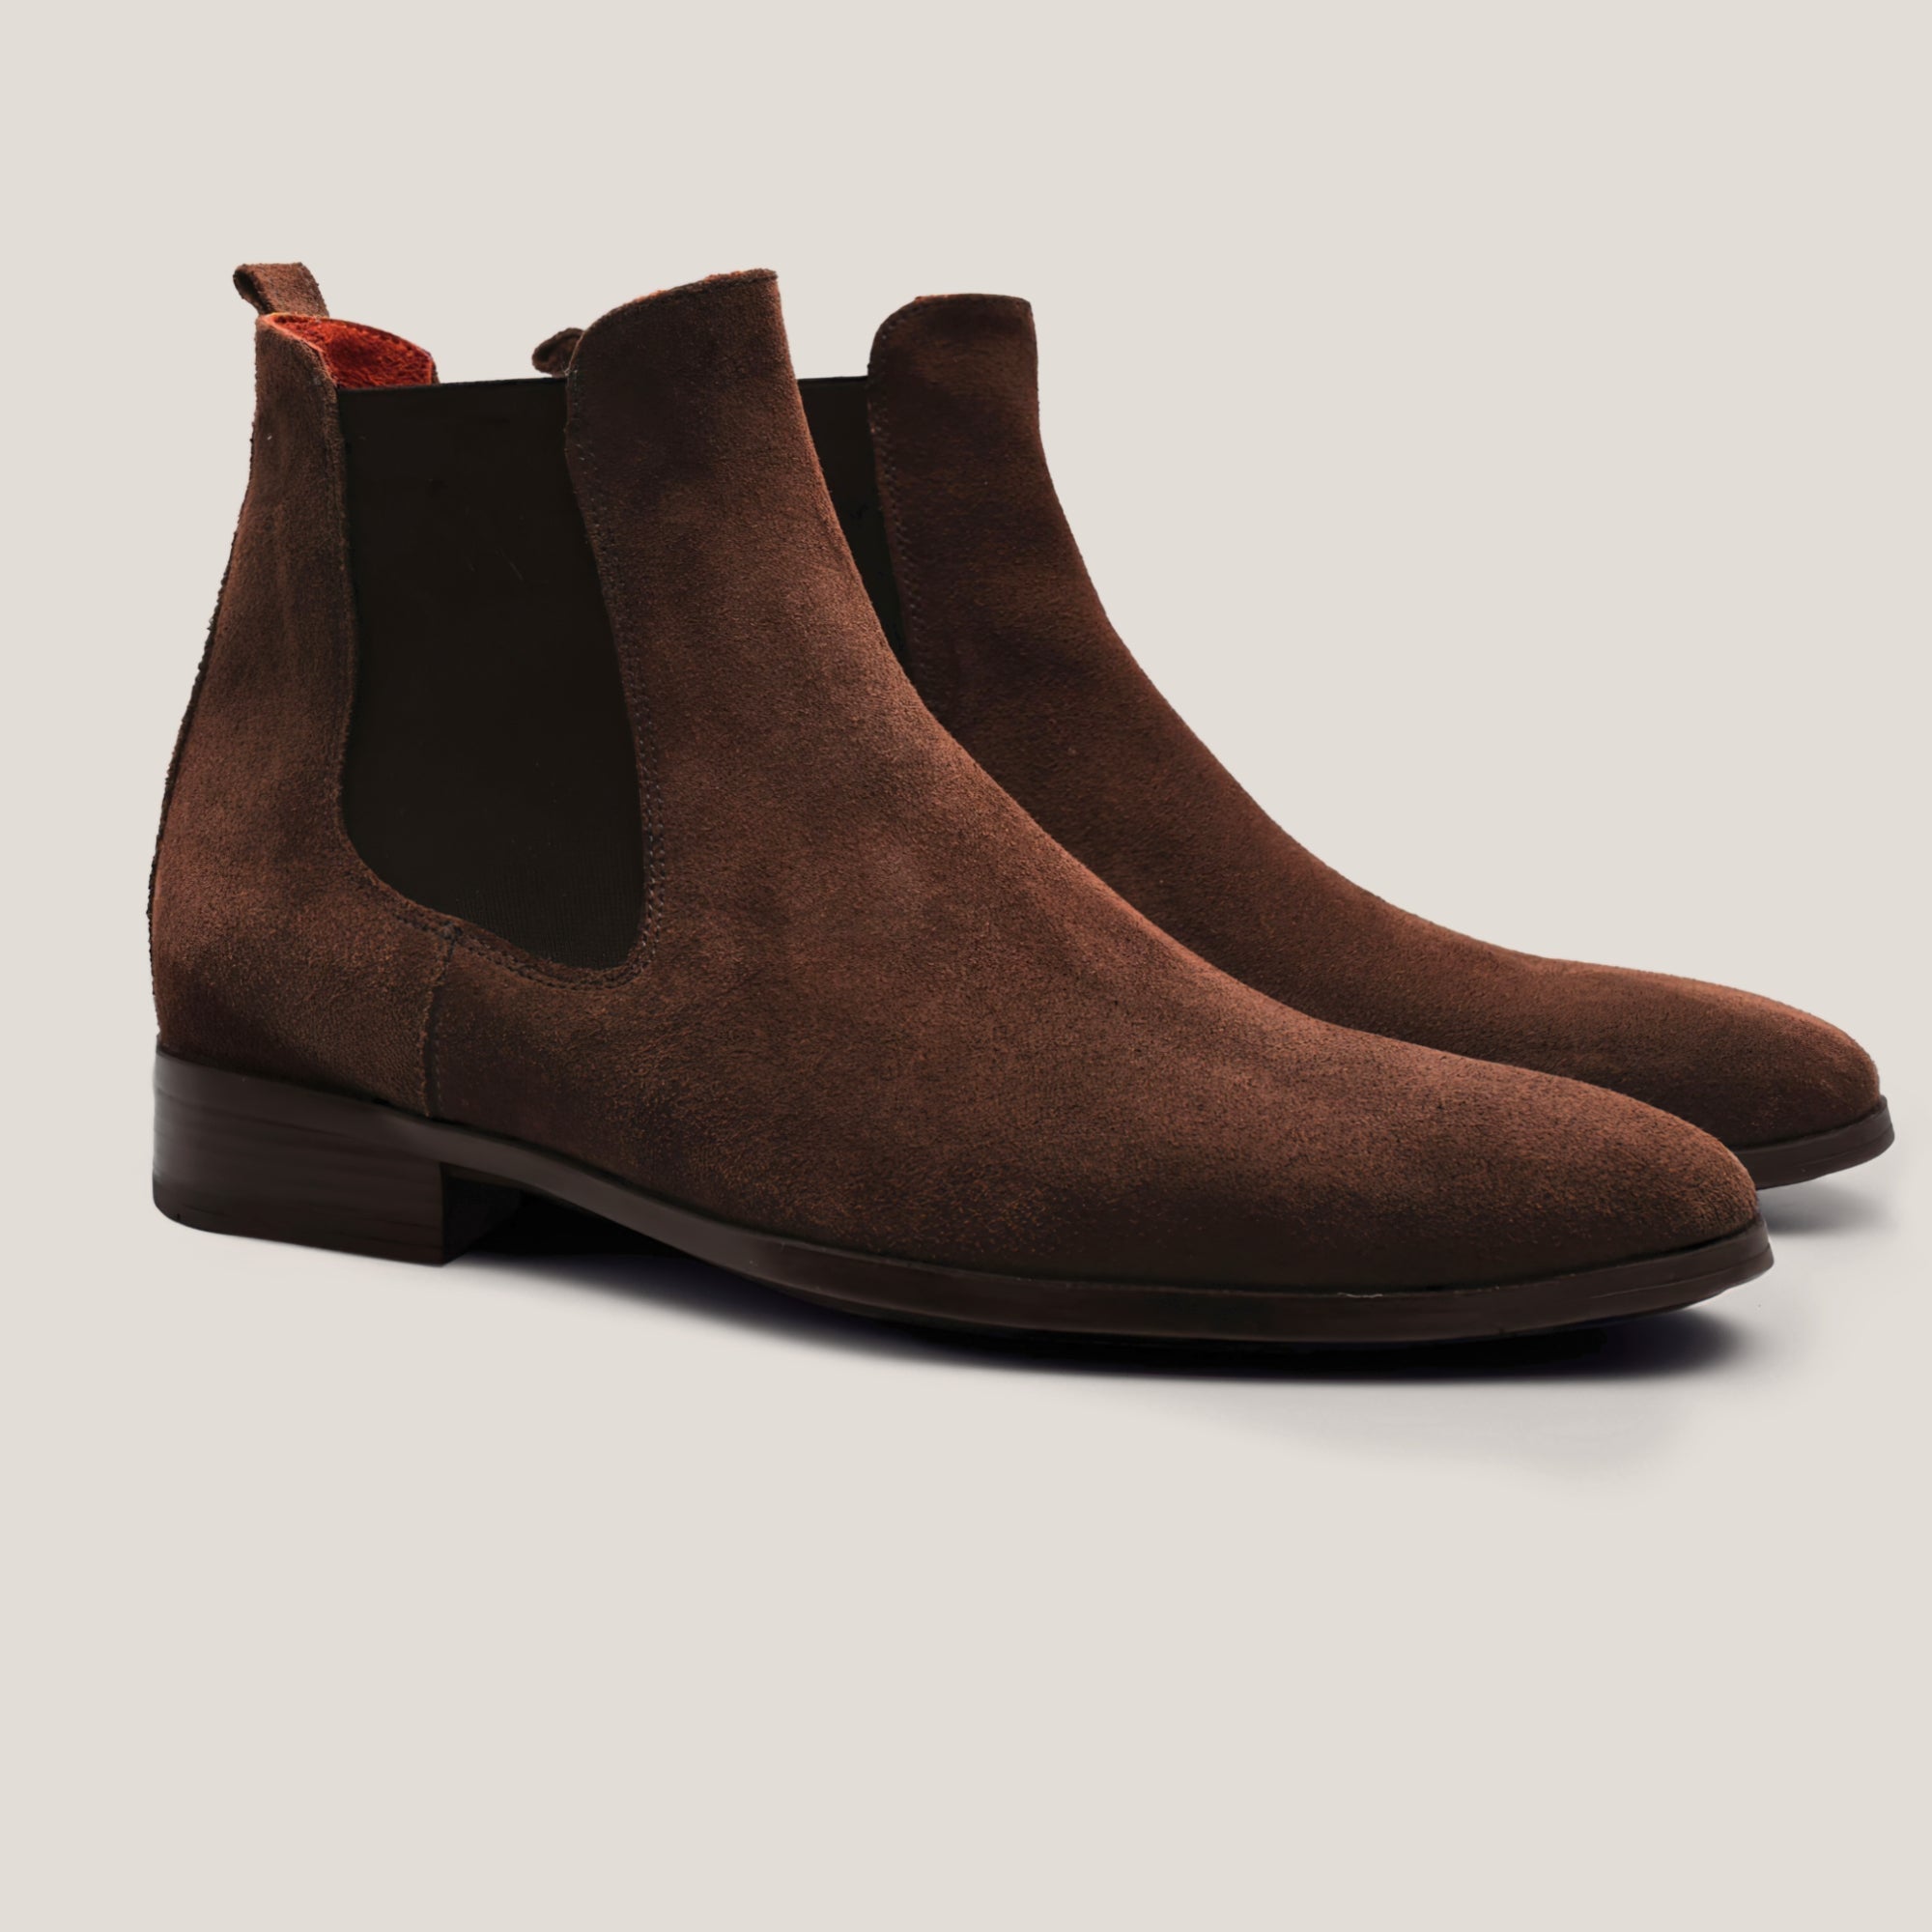 Chelsea Boot Chocolat Suede - Reinhard Frans - Chelsea Boots